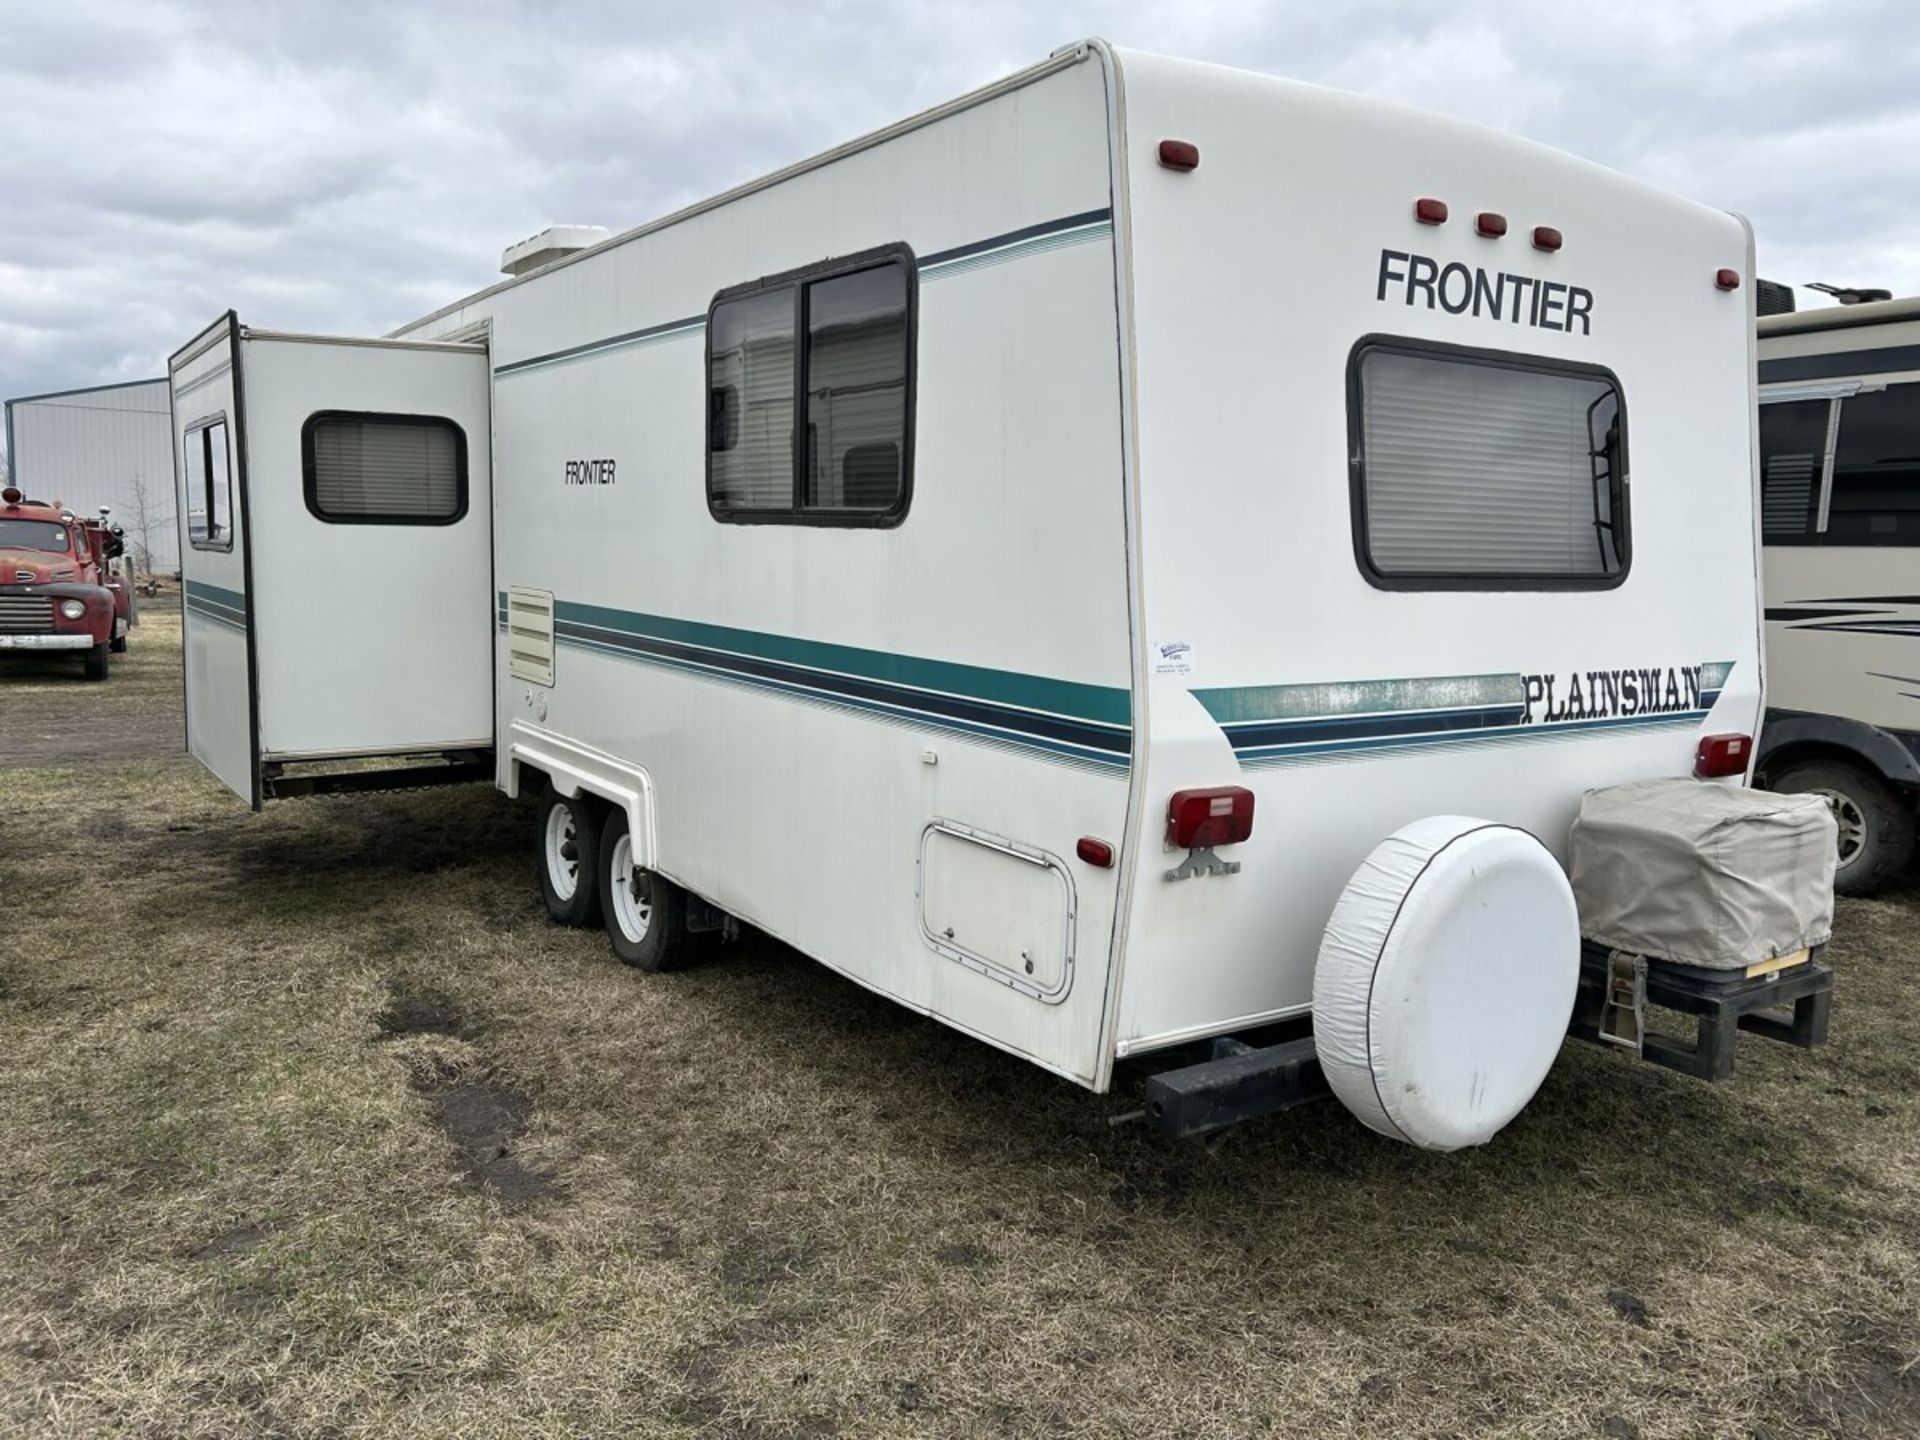 1999 FRONTIER PLAINSMAN T264SL 25 FT HOLIDAY TRAILER, SLIDE OUT, NOTE: CUSTOM STEP SOLD SEPERATELY - Image 15 of 17